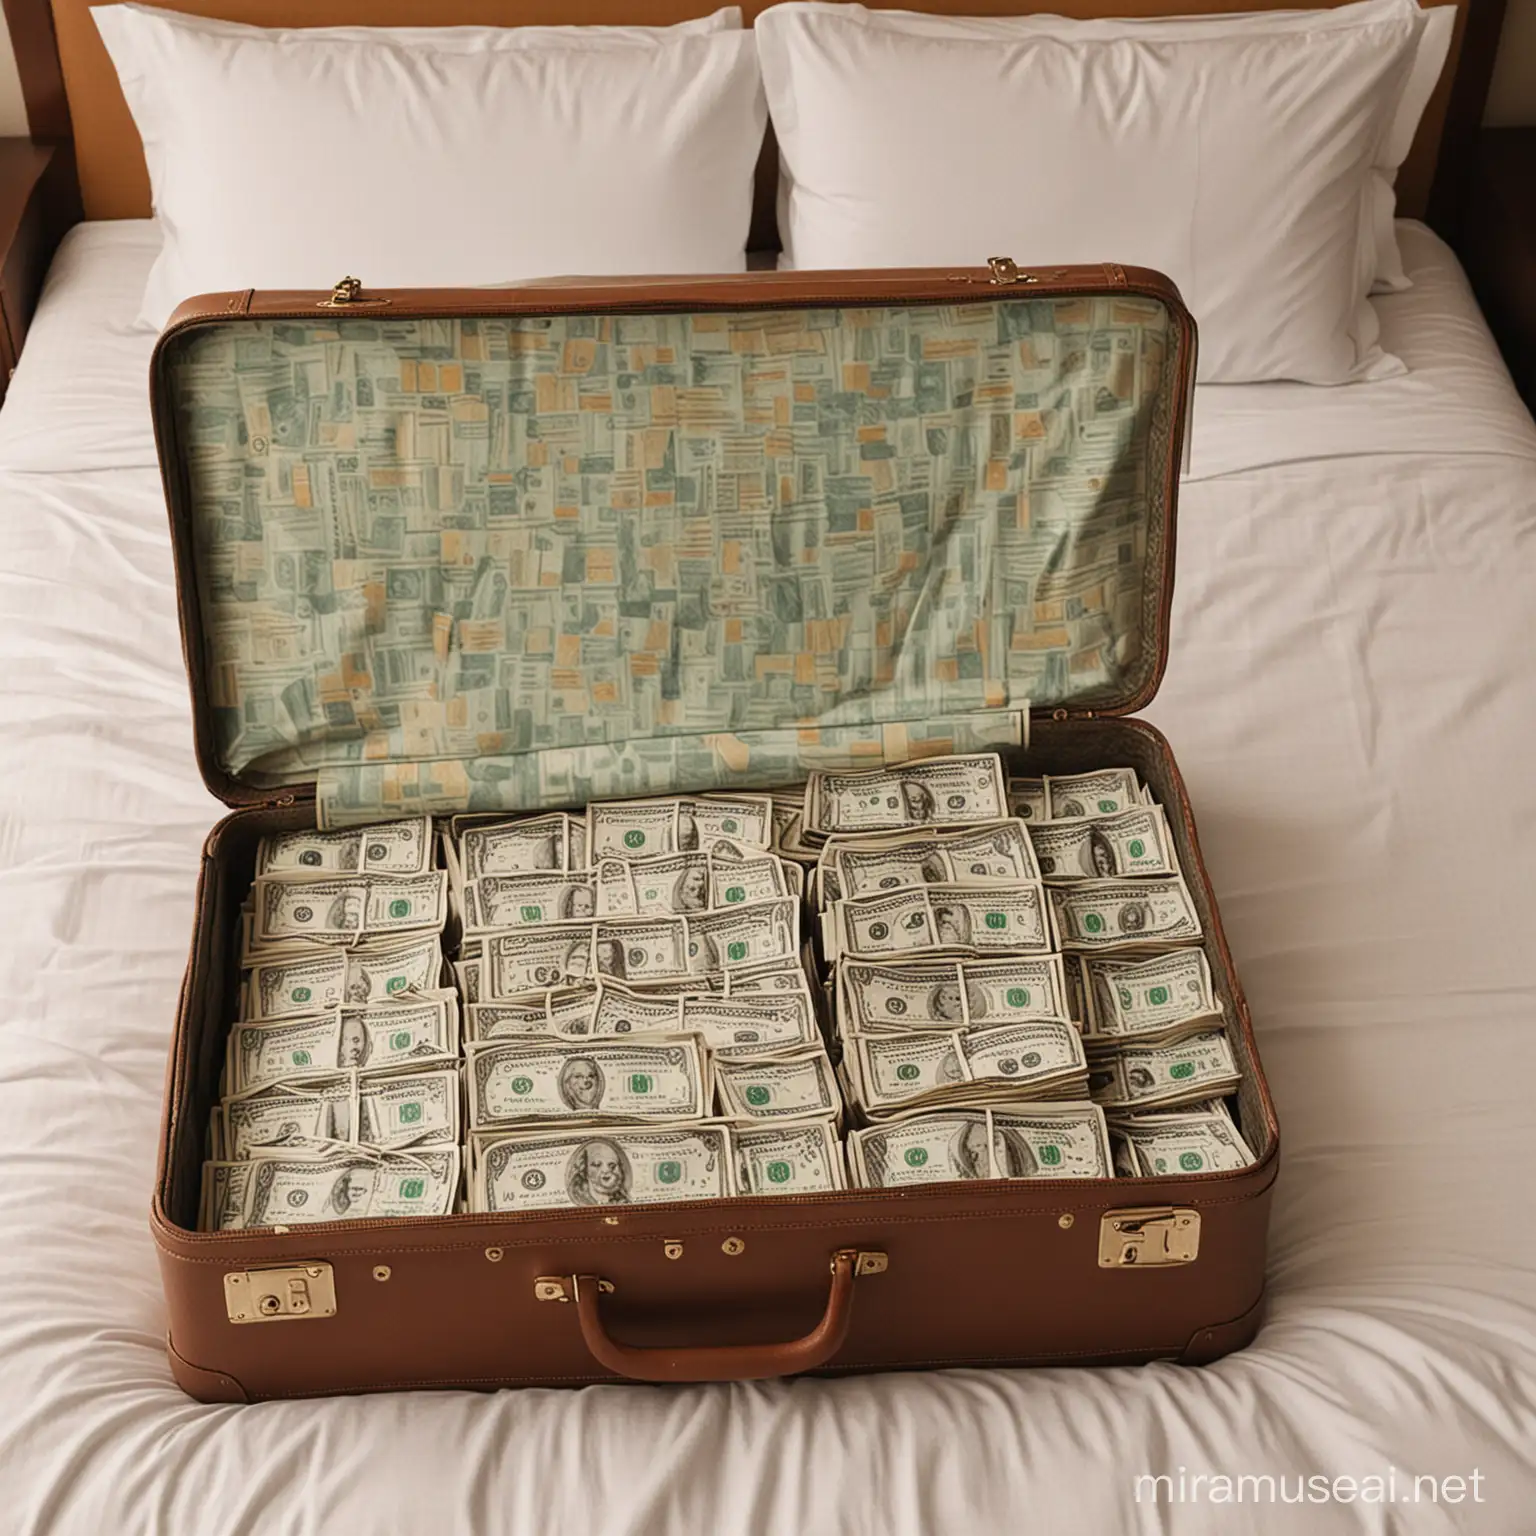 an open suitcase on a bed in a hotel room filled with american currency